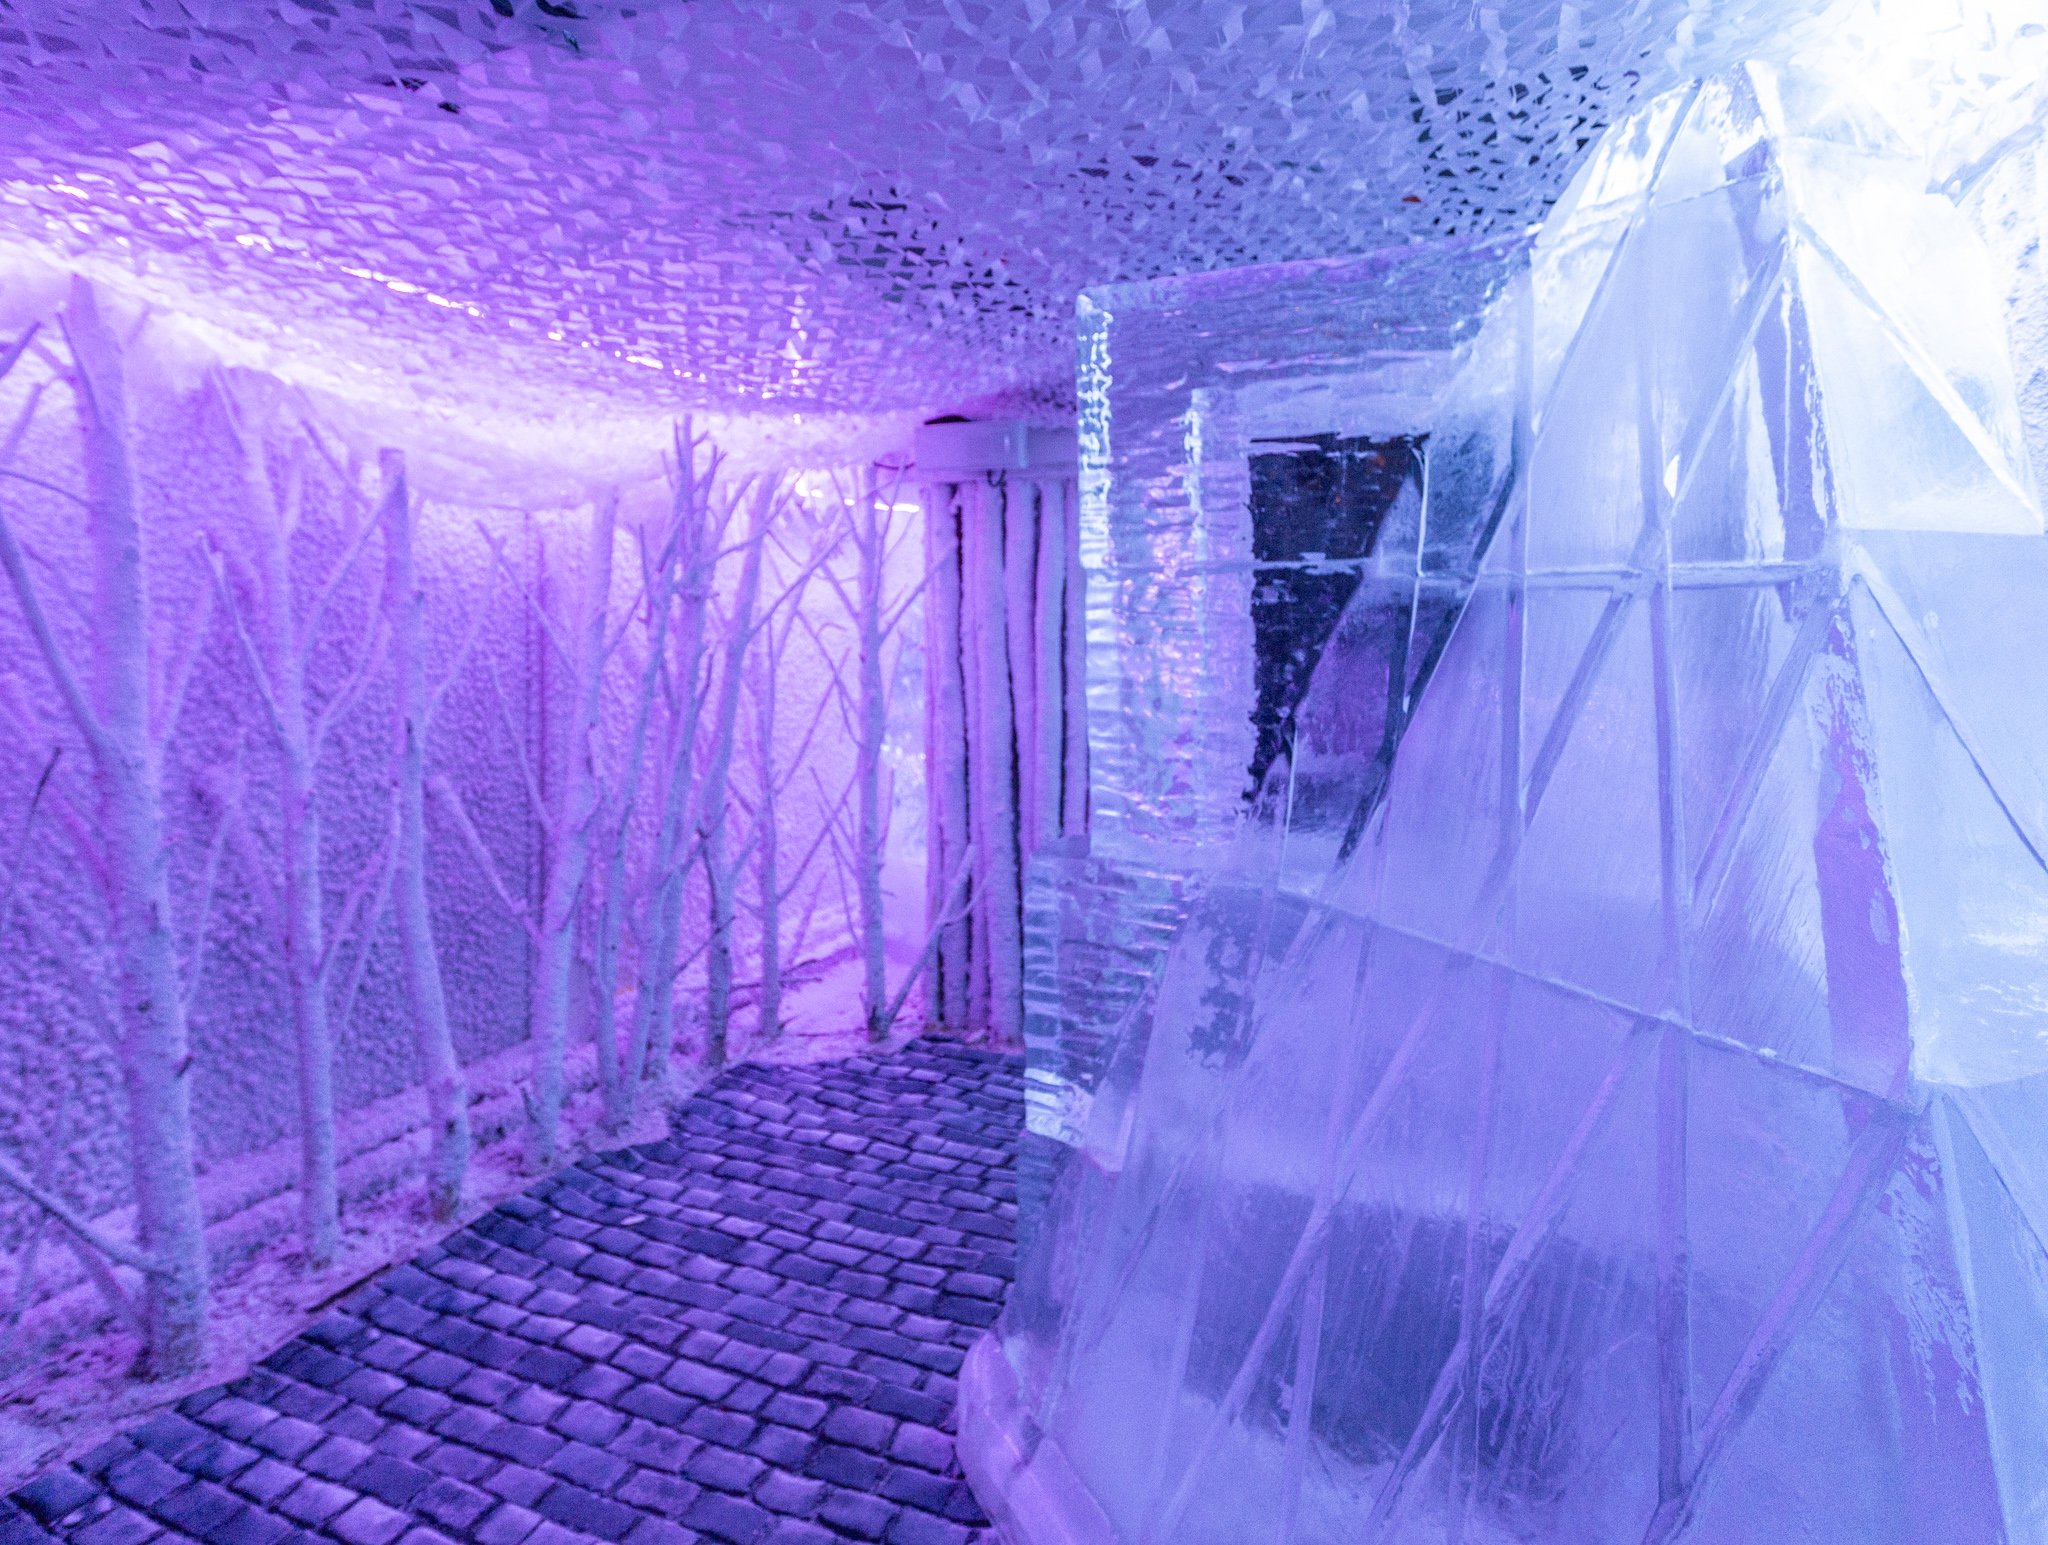 Ice Bar Paris-Experience-Kube Hotel-Montmartre-Going out in Paris